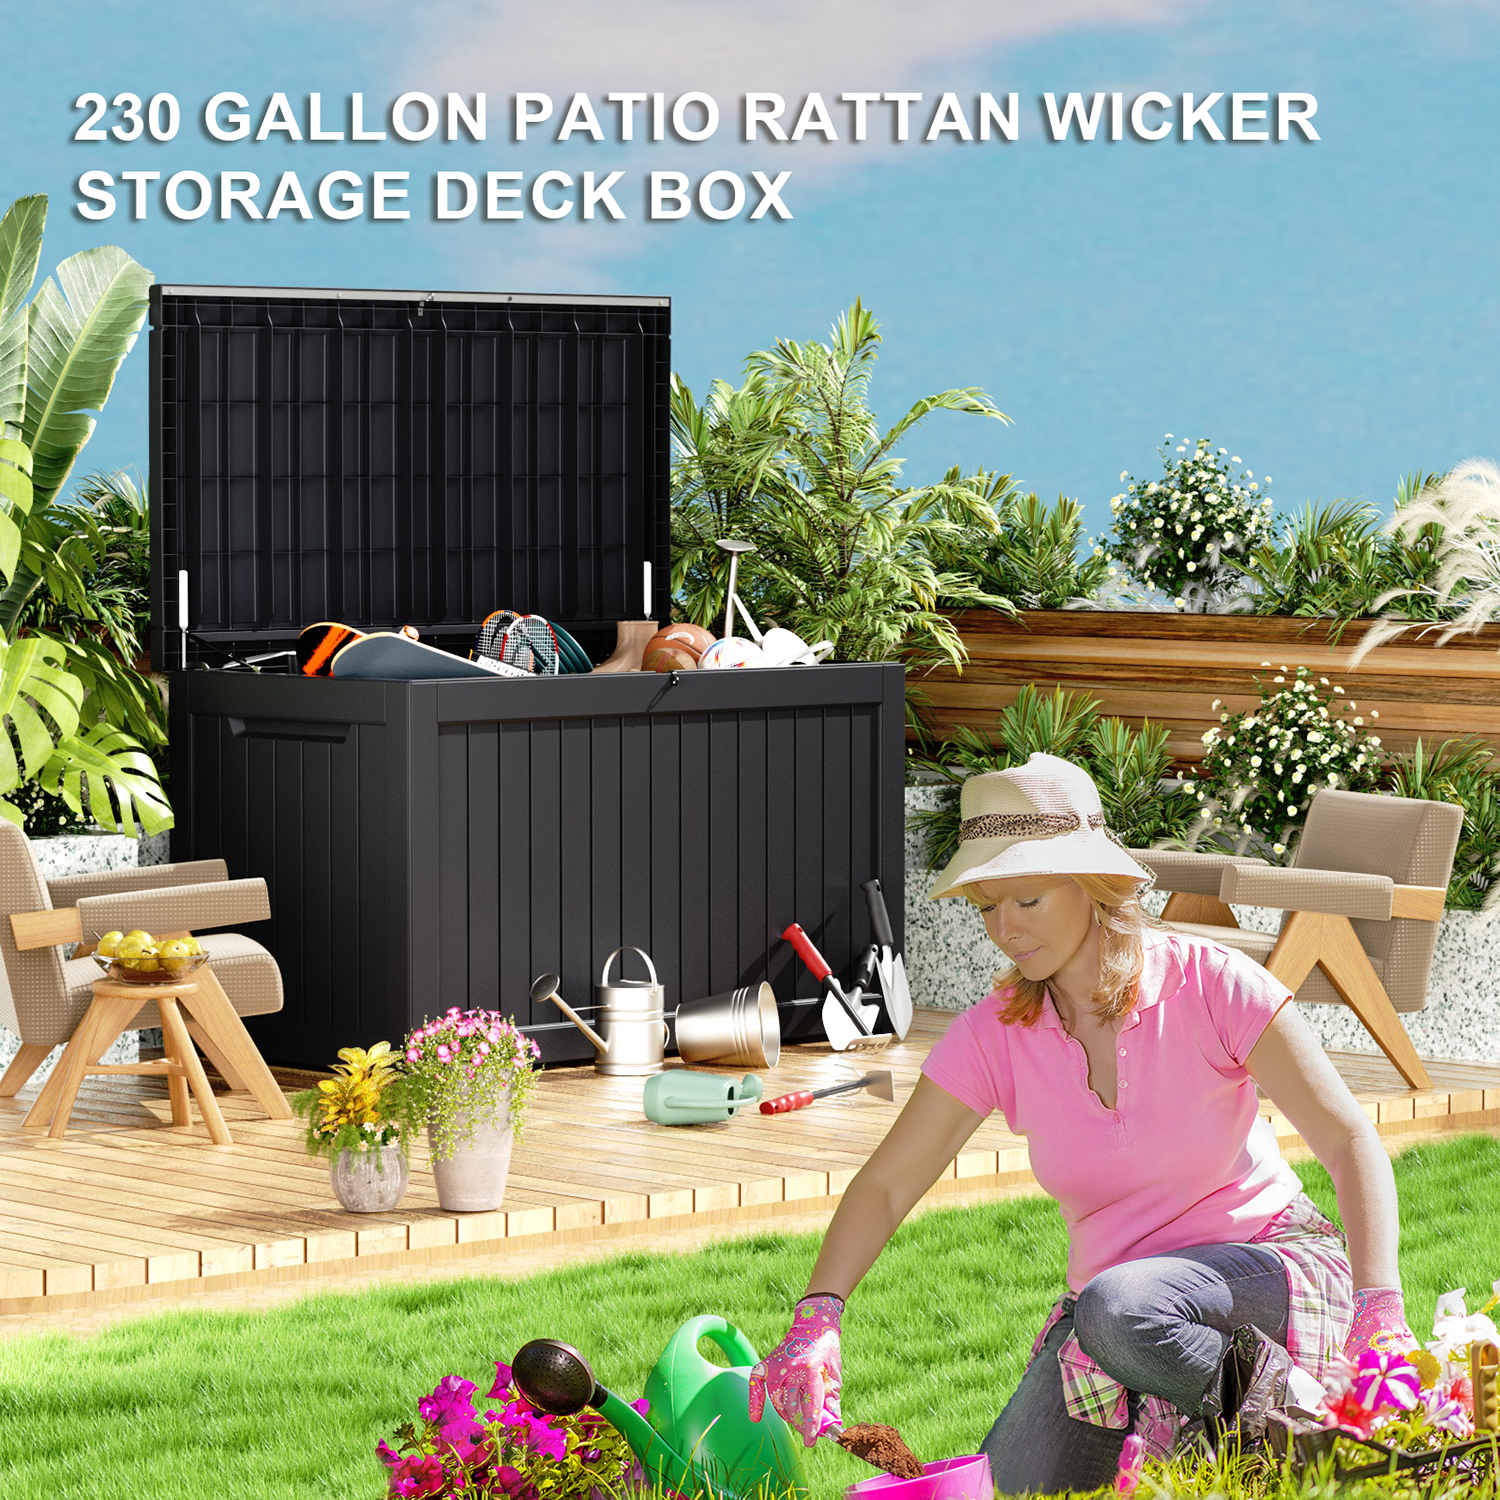 230 Gallon recyclable eco-friendly resin material storage Deck Box